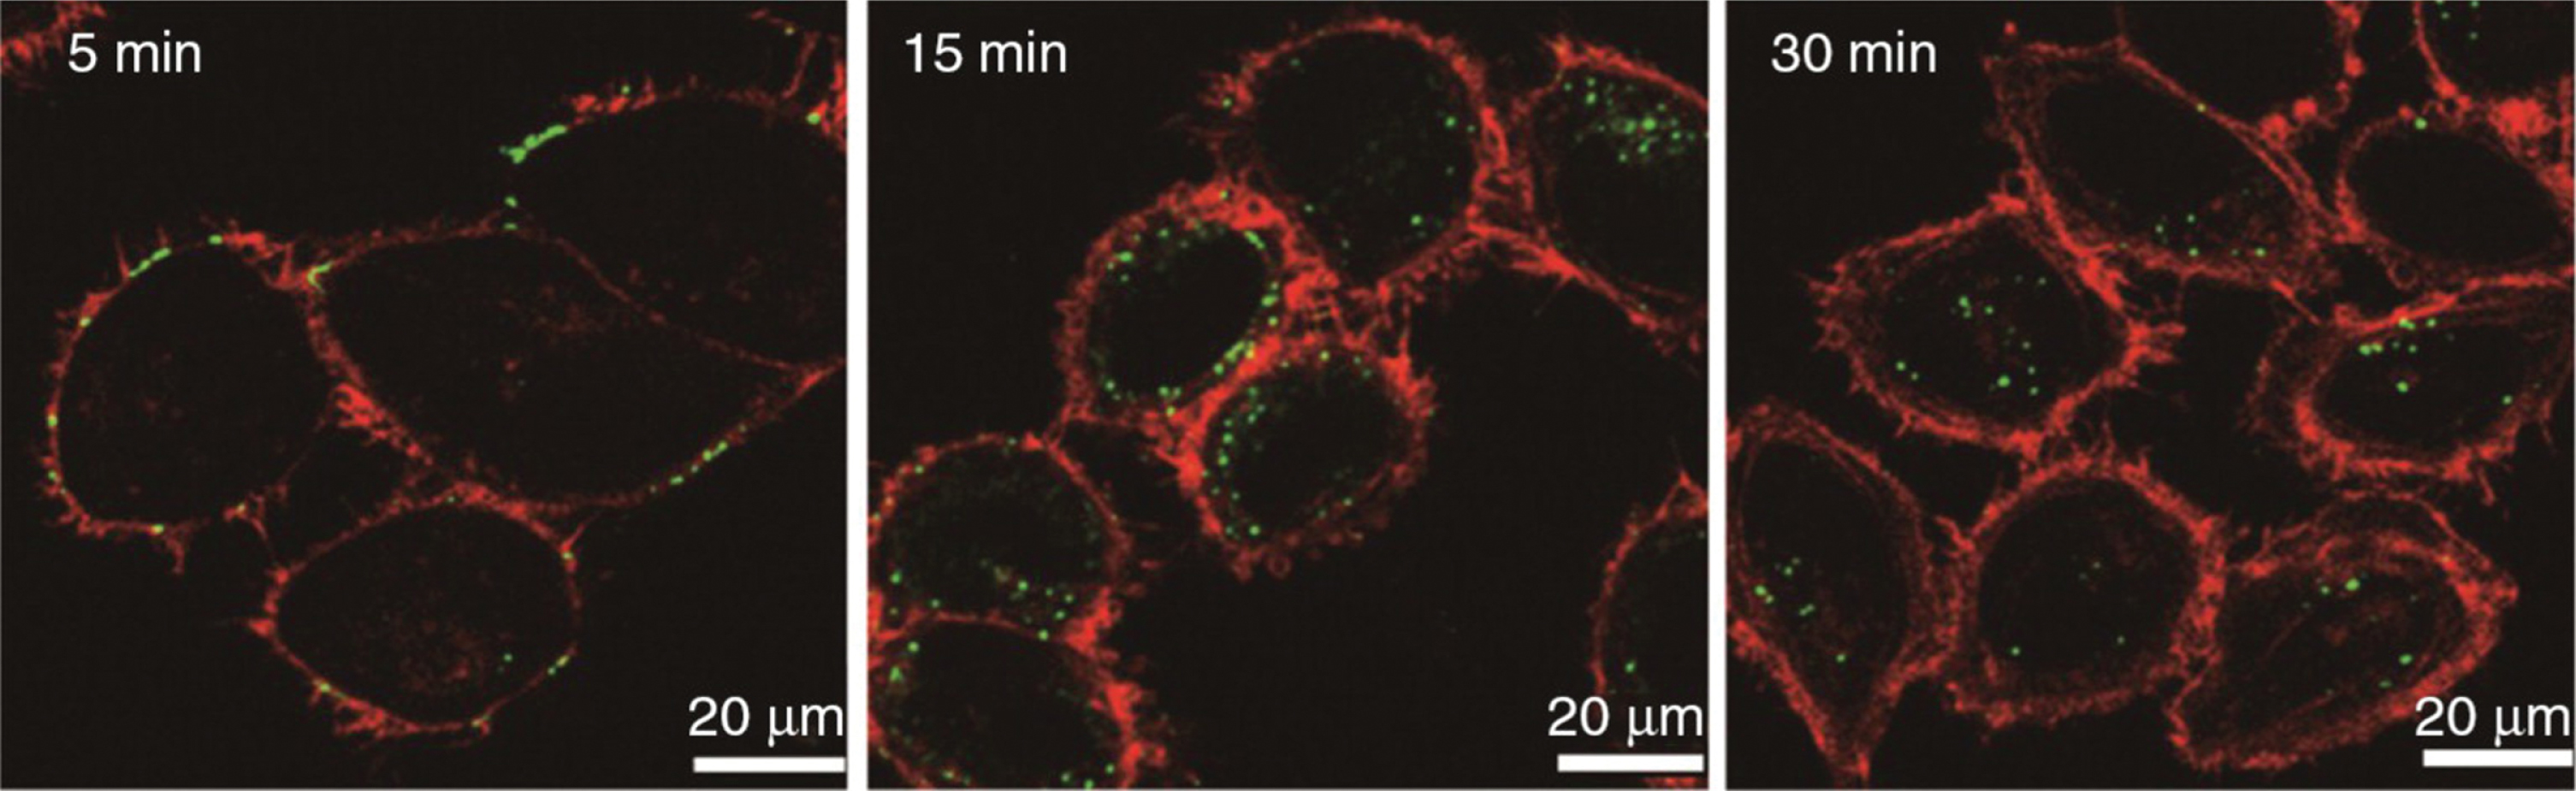 Time course study using labeled P. gingivalis OMVs (lime green circles) in human HOK epithelial cells. All OMVs were found within cells by 30 minutes. Reprinted from Olsen I, Amano A (2015) Outer membrane vesicles – offensive weapons or good Samaritans? J Oral Microbiol 7, 1, with permission by Taylor & Francis Ltd (http://www.tandfonline.com).